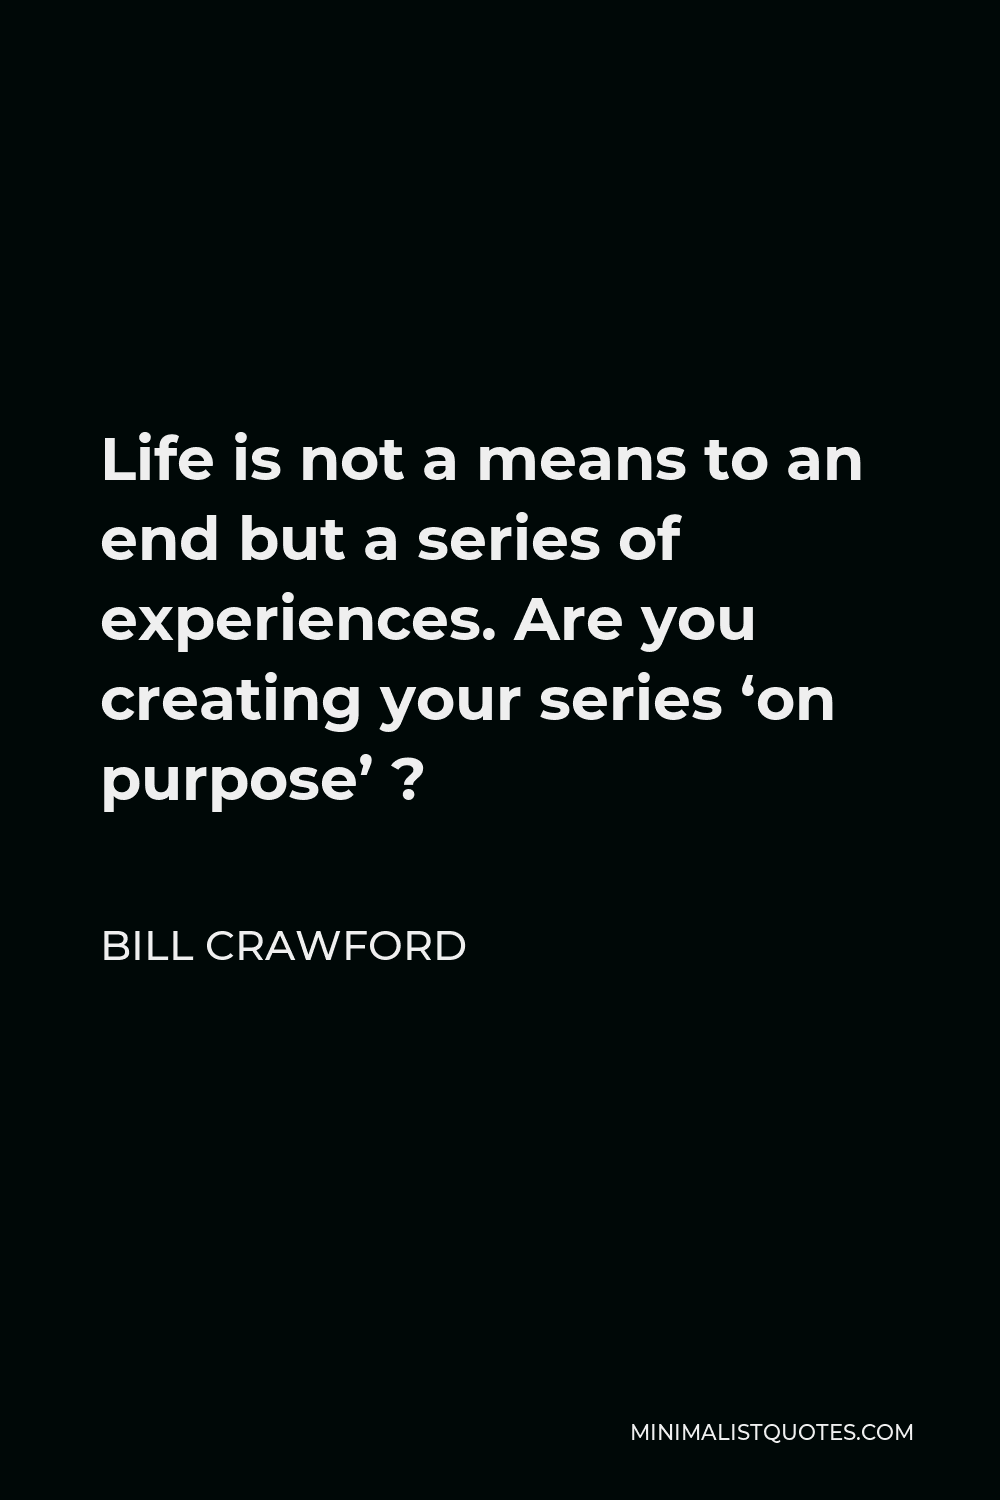 Bill Crawford Quote - Life is not a means to an end but a series of experiences. Are you creating your series ‘on purpose’ ?